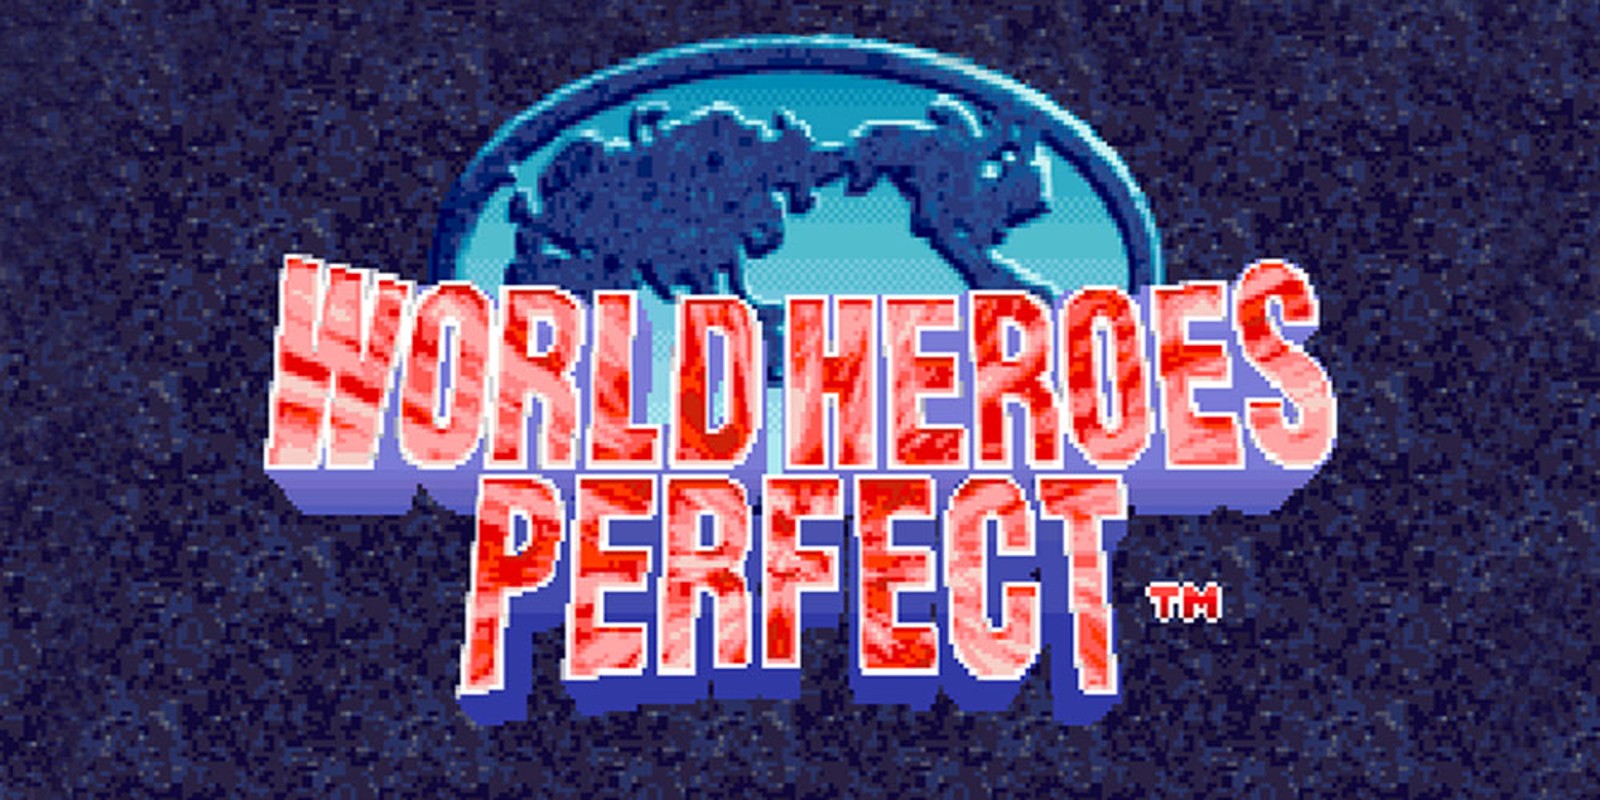 WORLD HEROES PERFECT